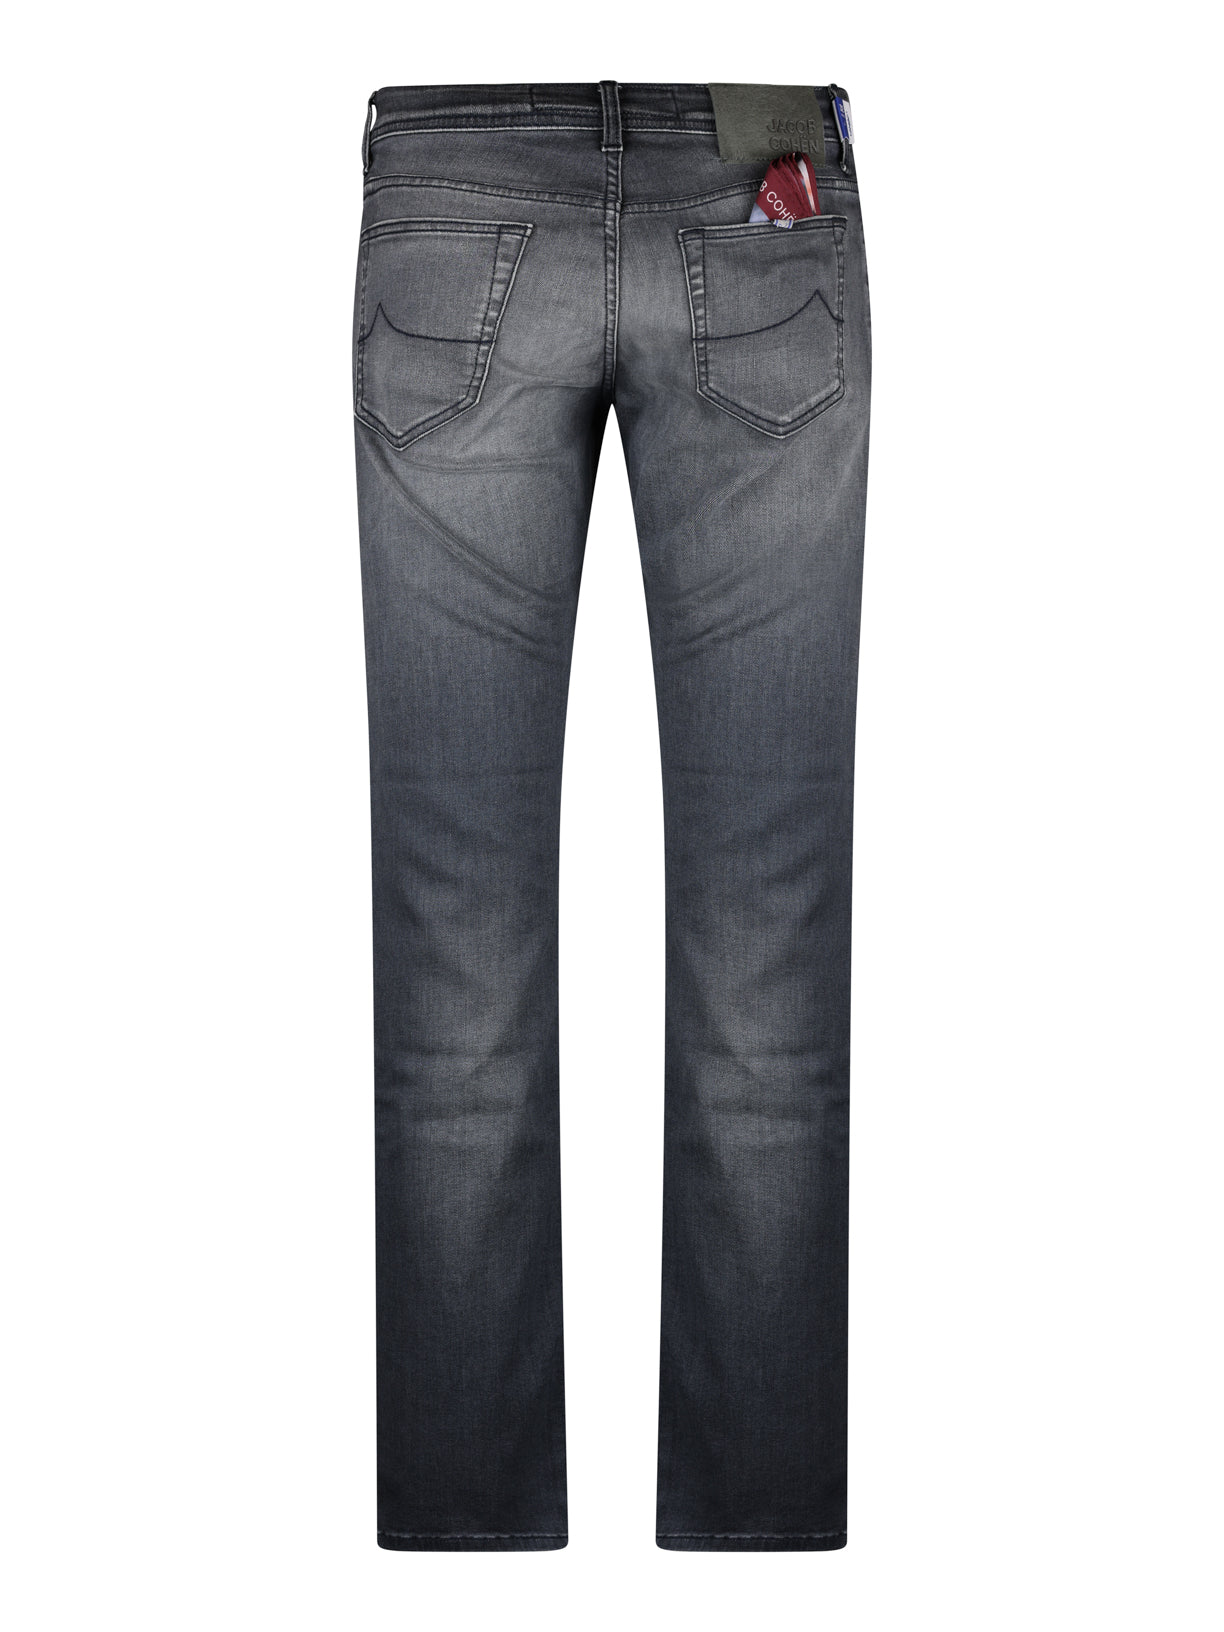 Load image into Gallery viewer, Jacob Cohen Bard Mid Grey Jean
